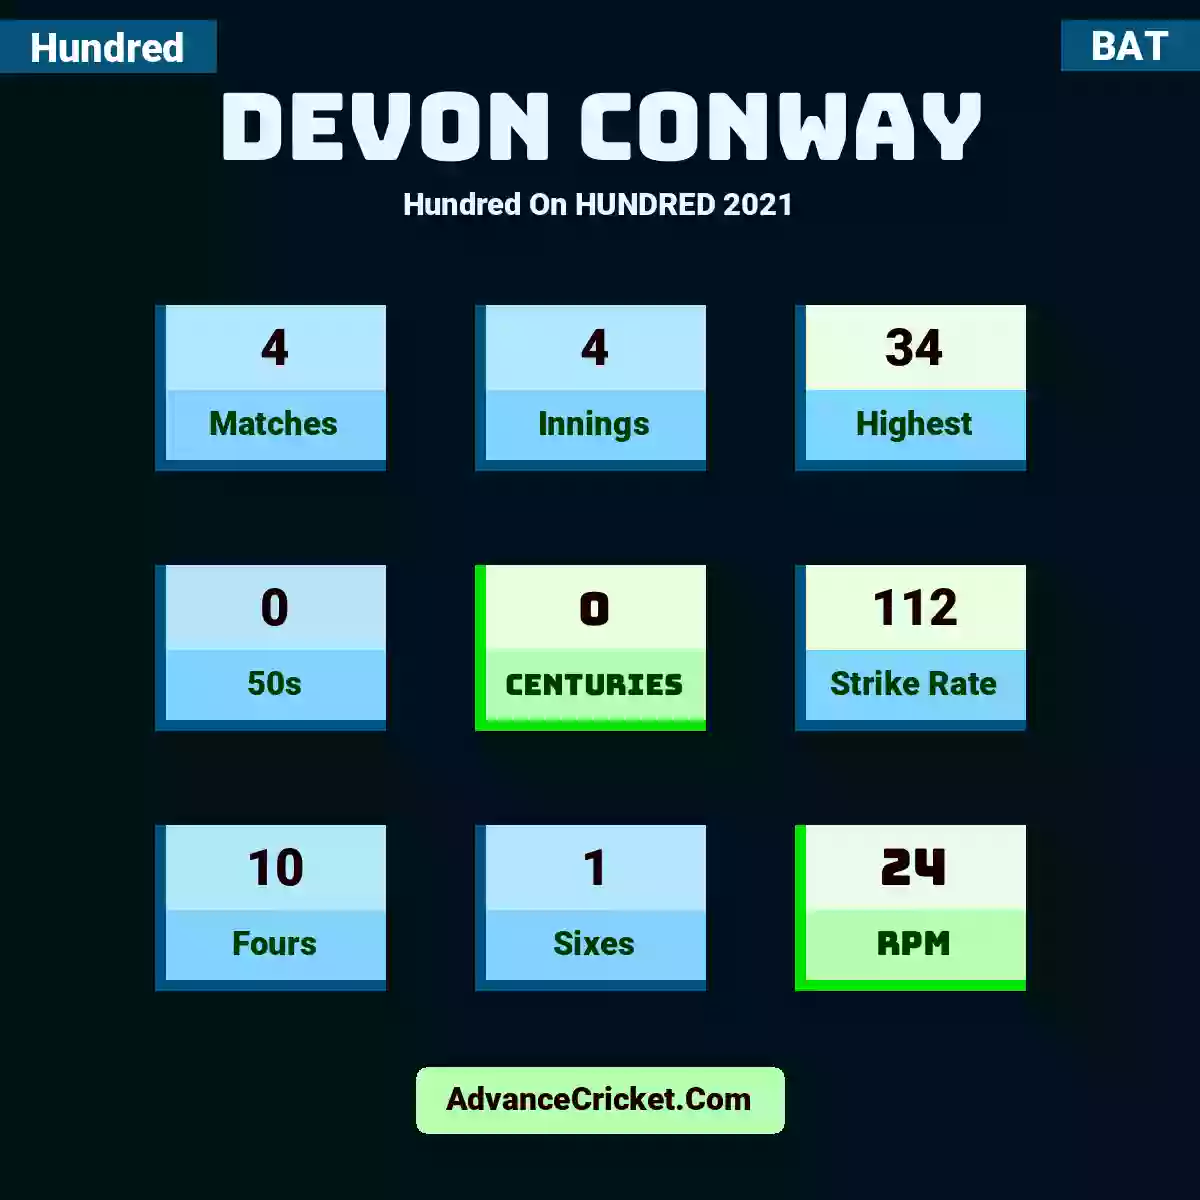 Devon Conway Hundred  On HUNDRED 2021, Devon Conway played 4 matches, scored 34 runs as highest, 0 half-centuries, and 0 centuries, with a strike rate of 112. D.Conway hit 10 fours and 1 sixes, with an RPM of 24.